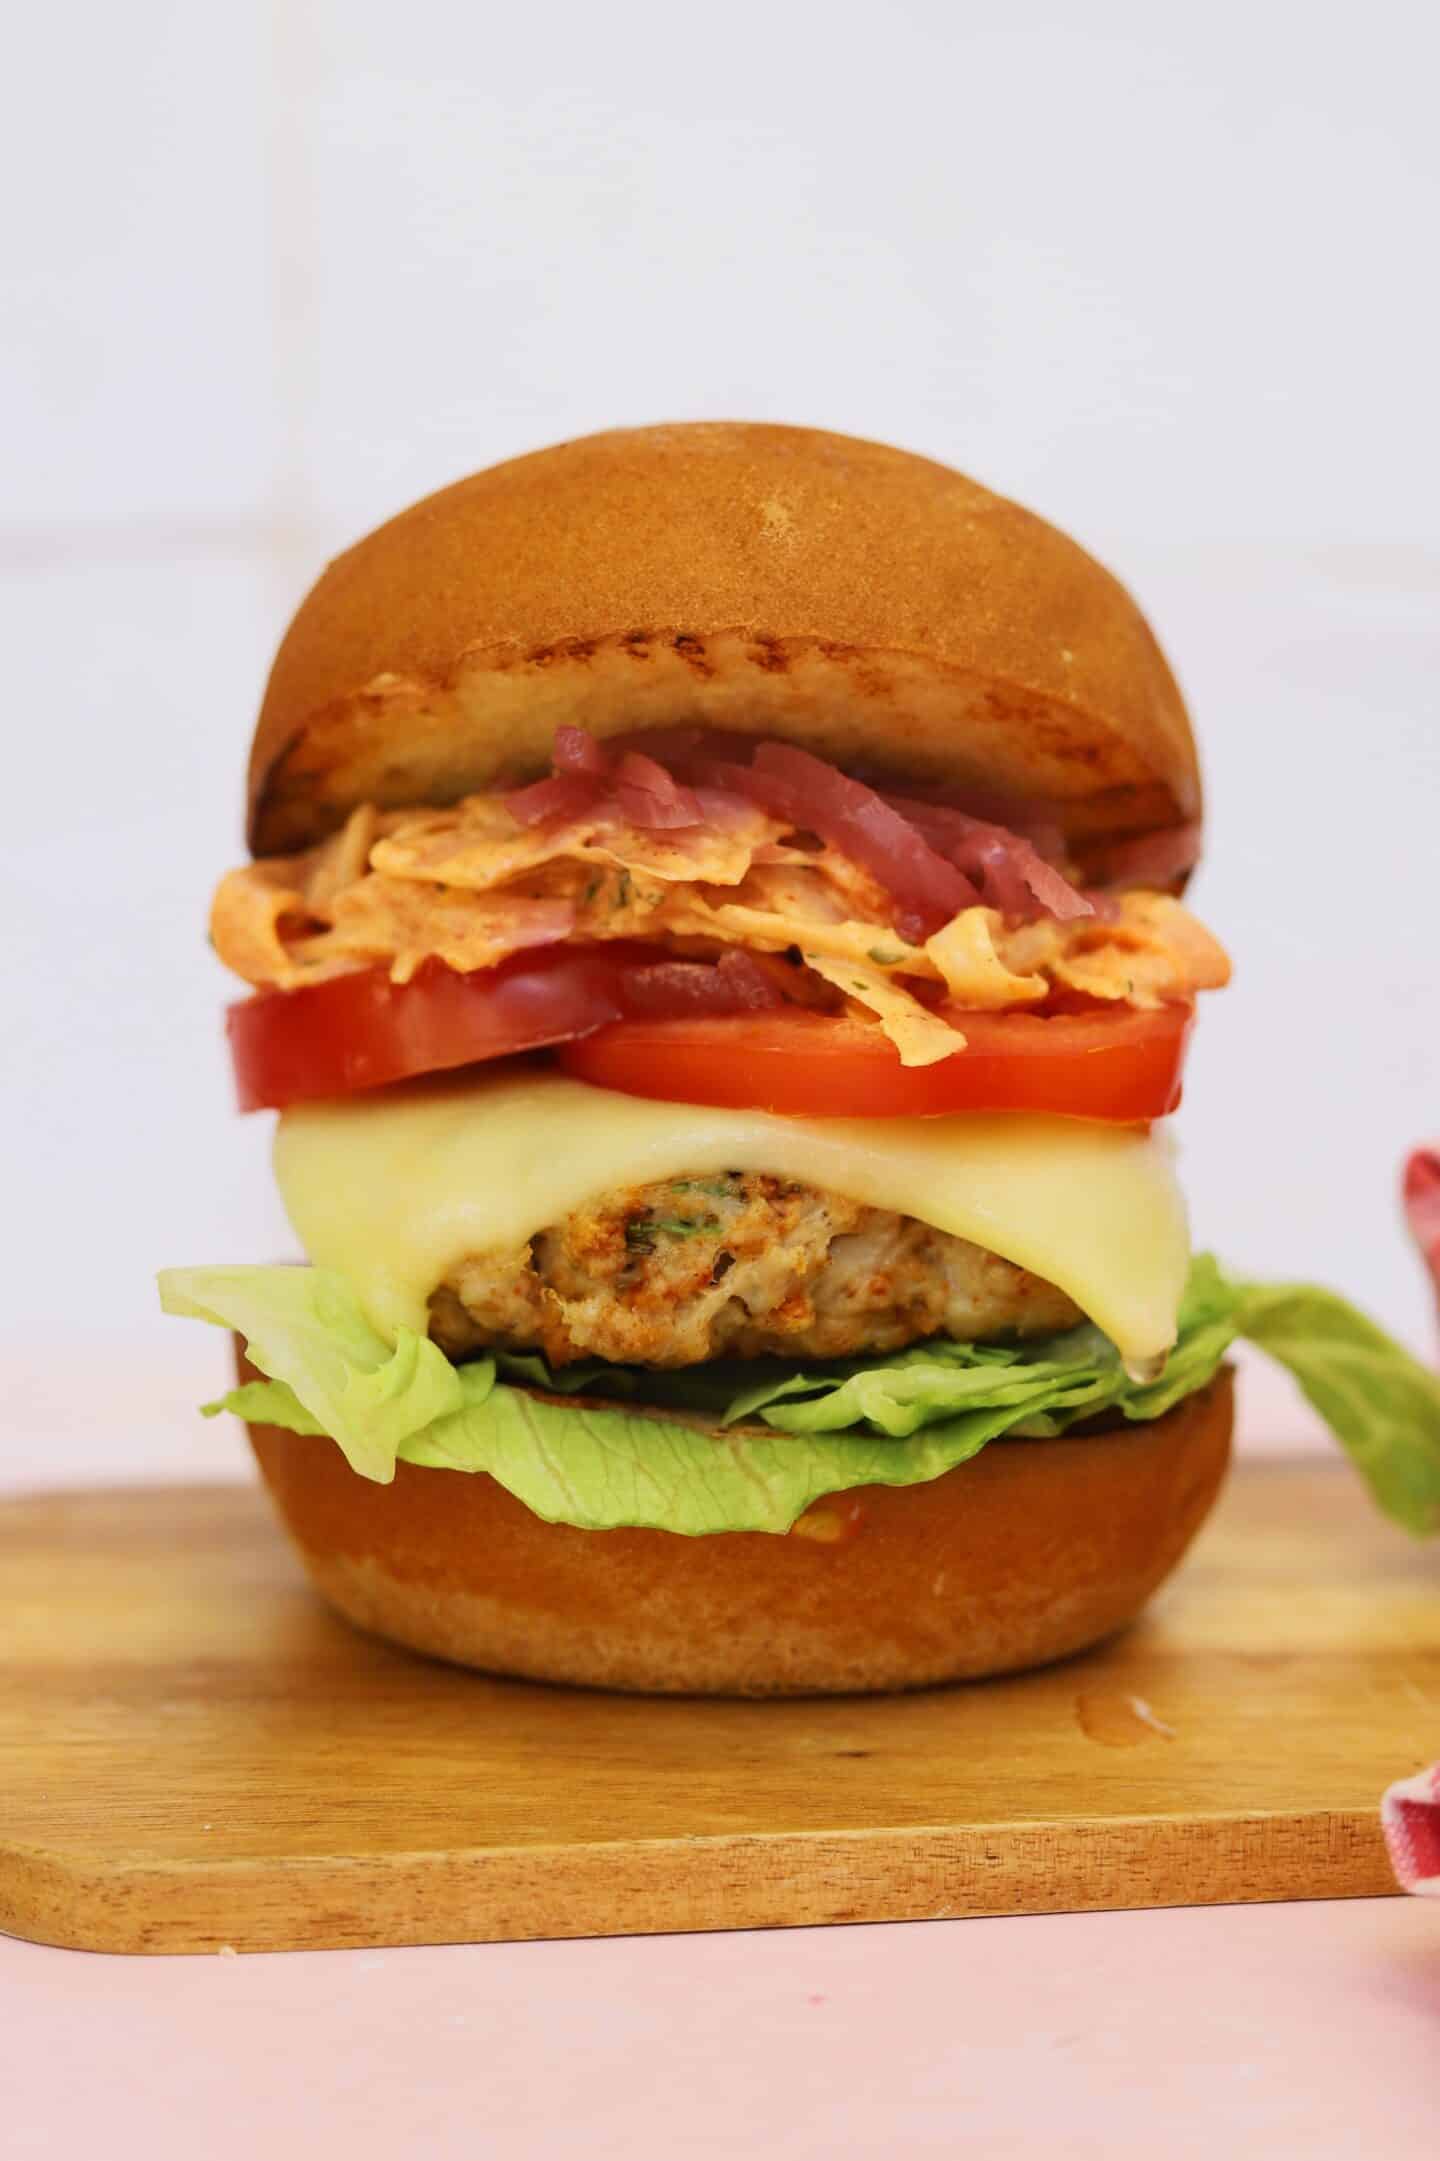 A gluten free ground chicken burger in a bun with lettuce, tomato and cheese.